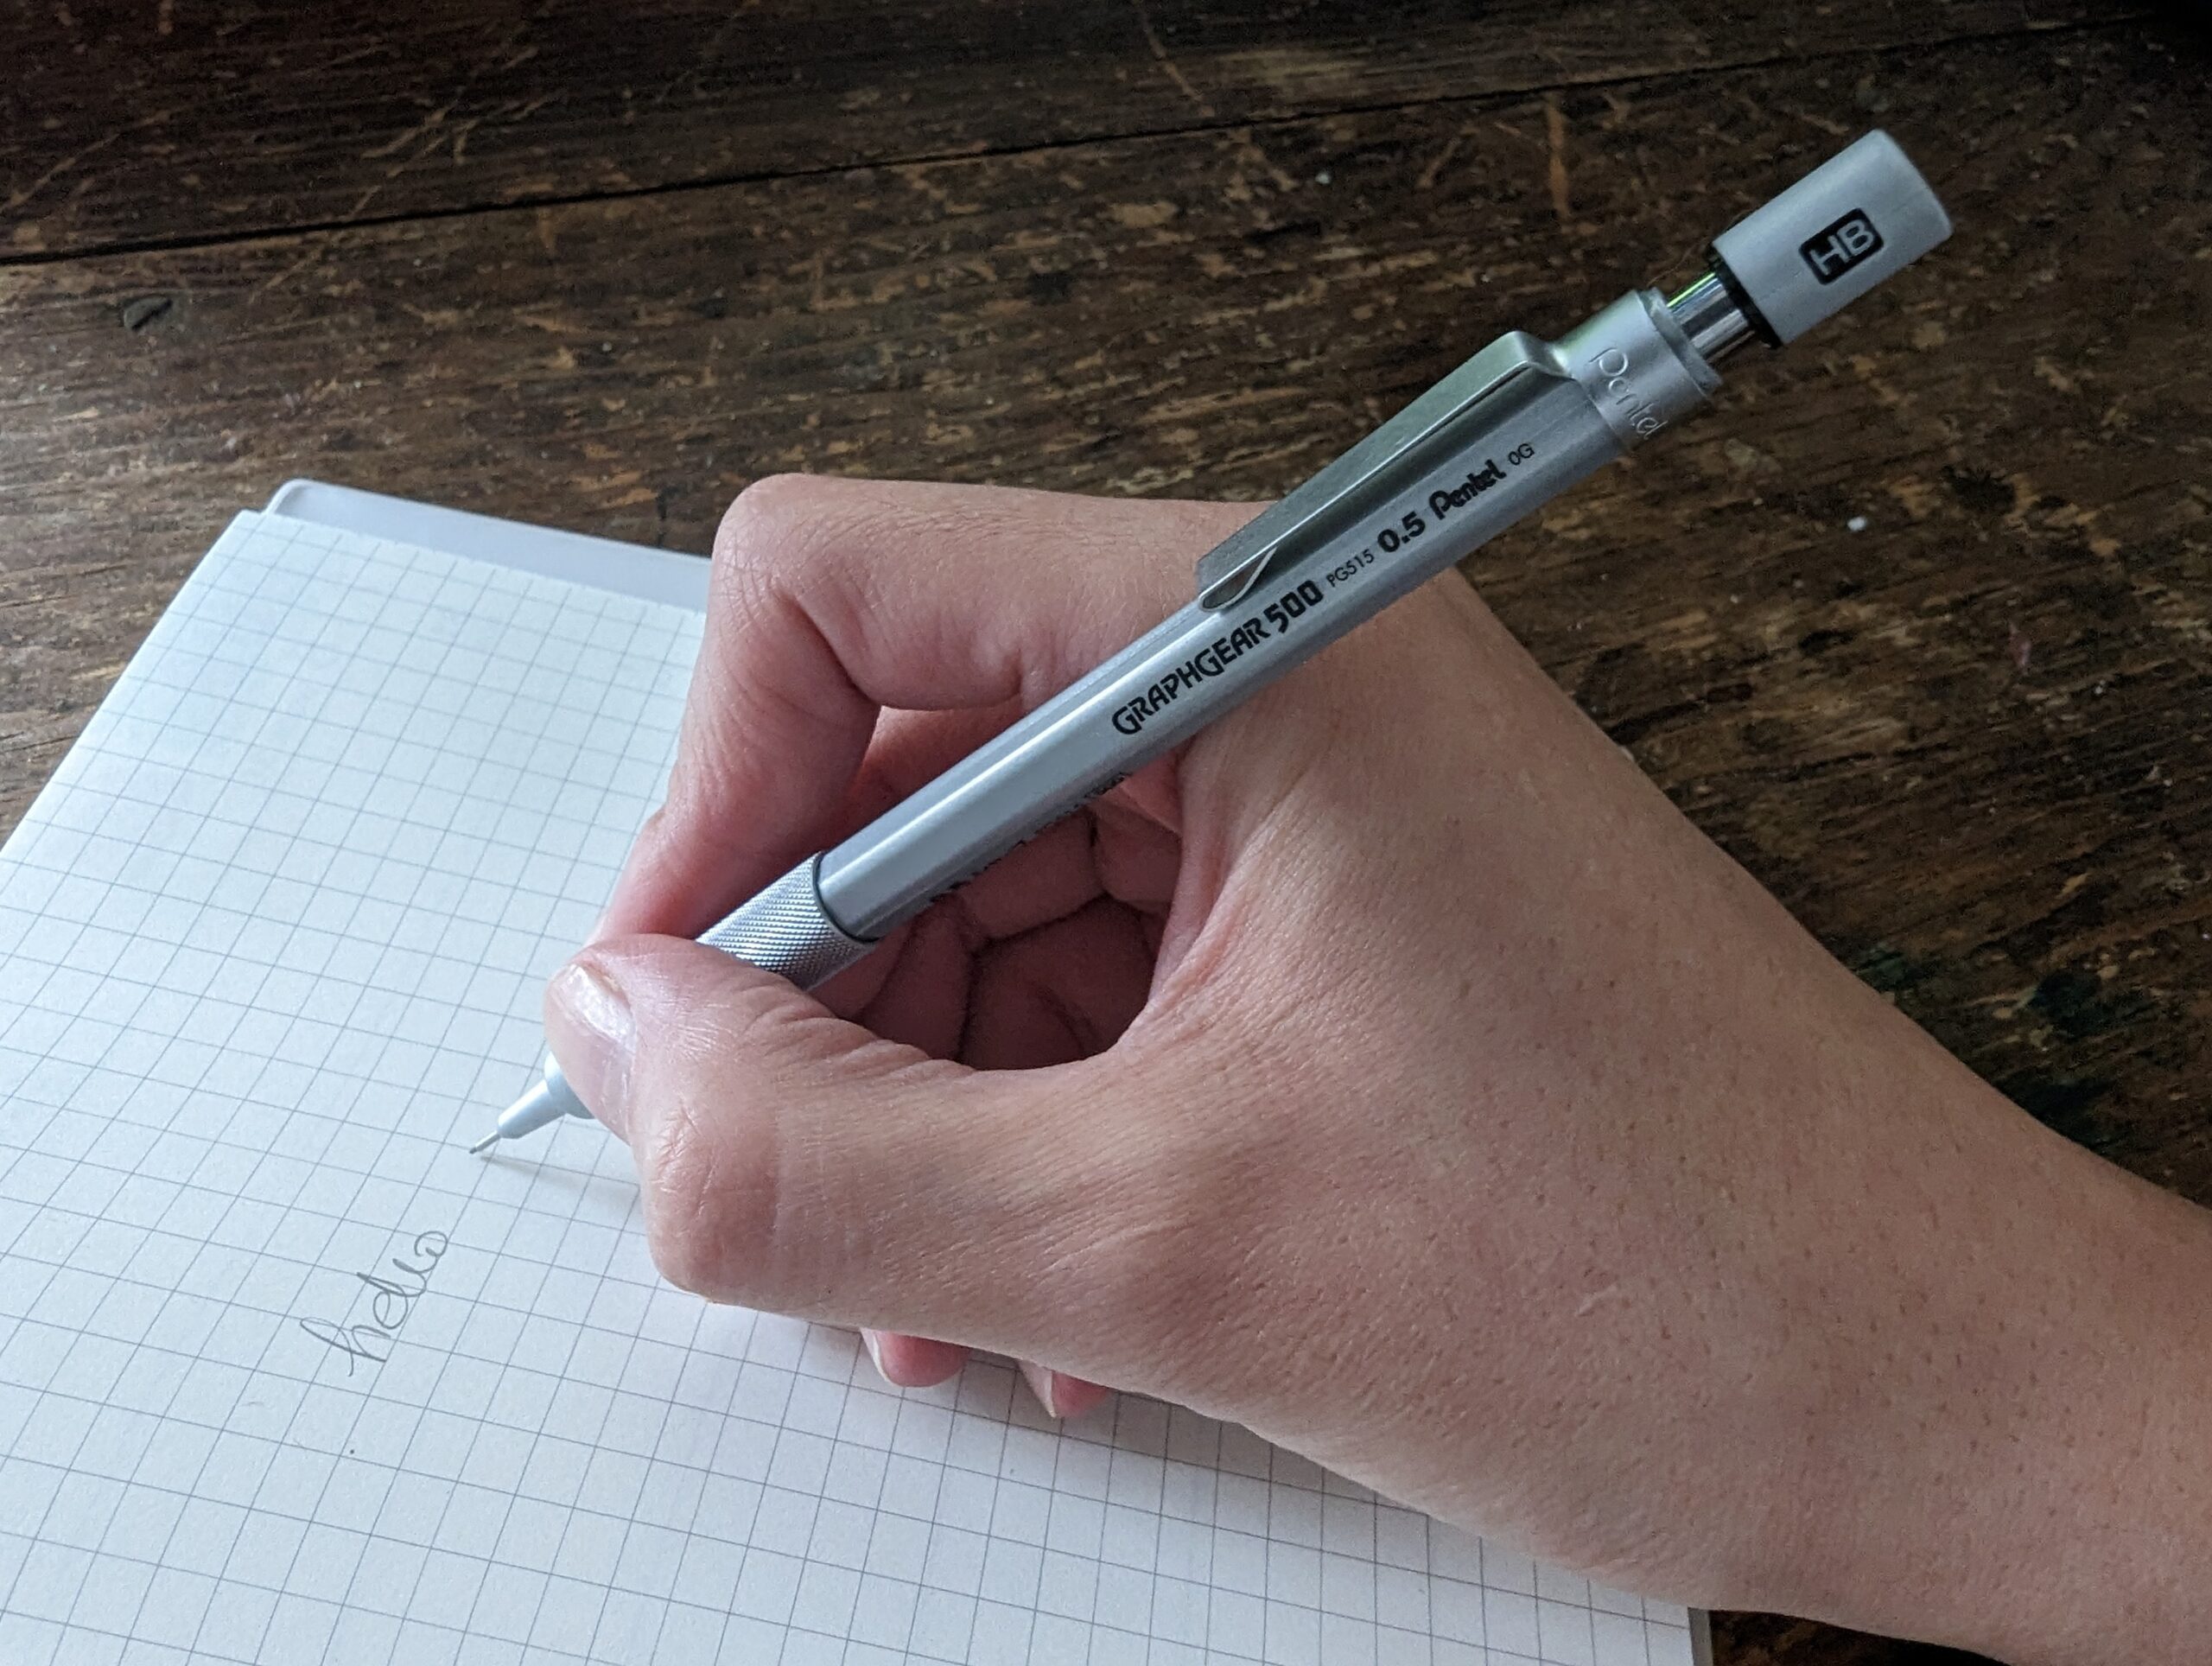 Writing Roundup: 10 Pens and Pencils for Every Preference